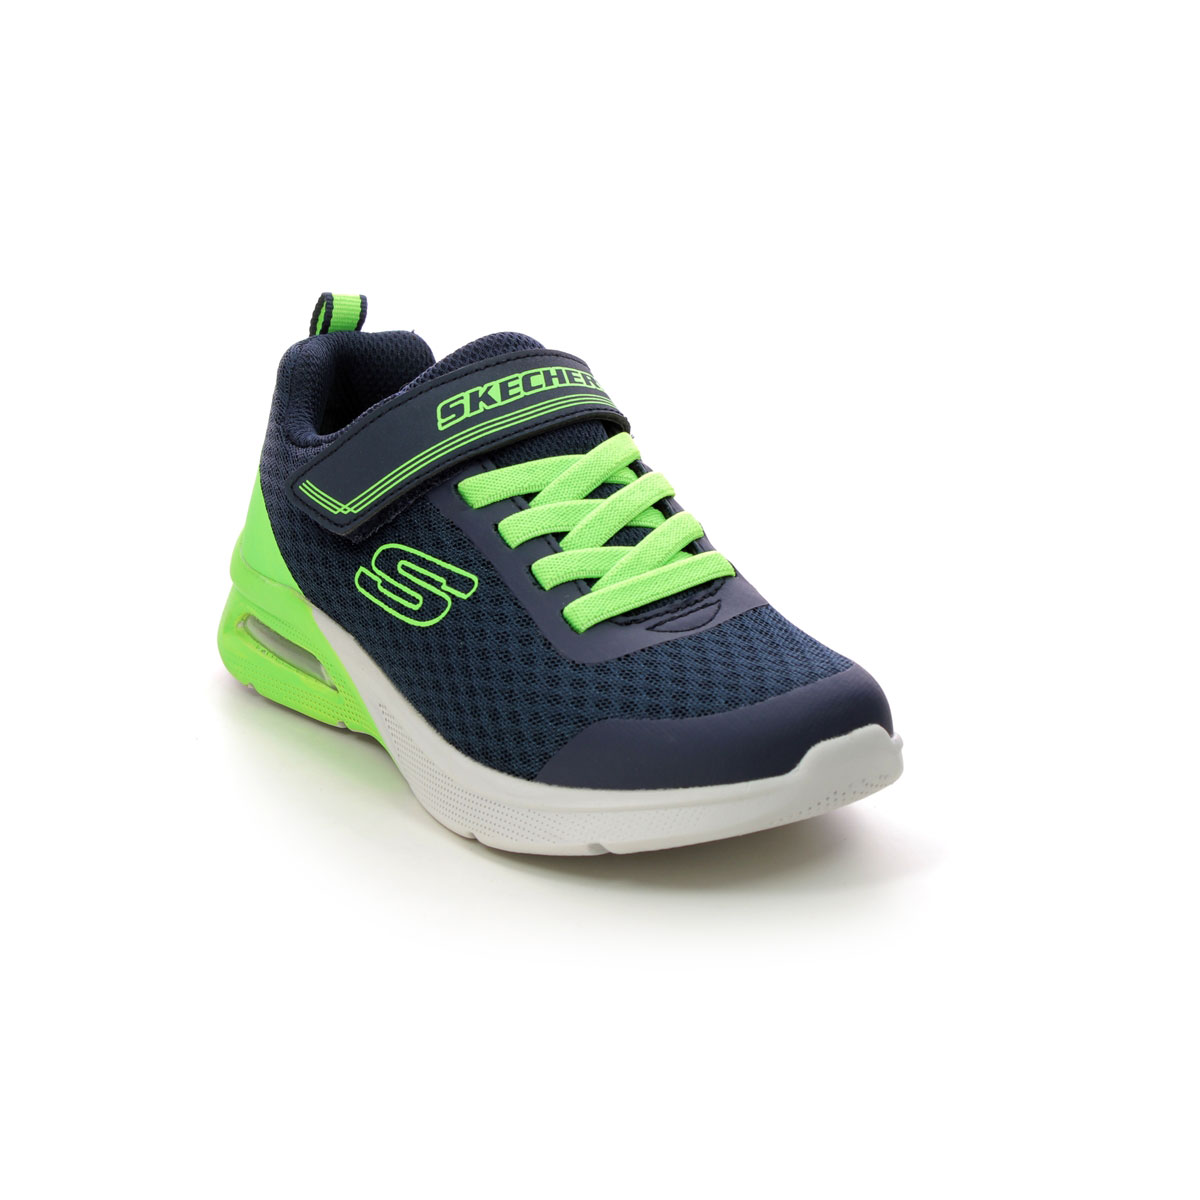 Skechers Microspec Max Navy Lime Kids Trainers 403773L In Size 36 In Plain Navy Lime For kids